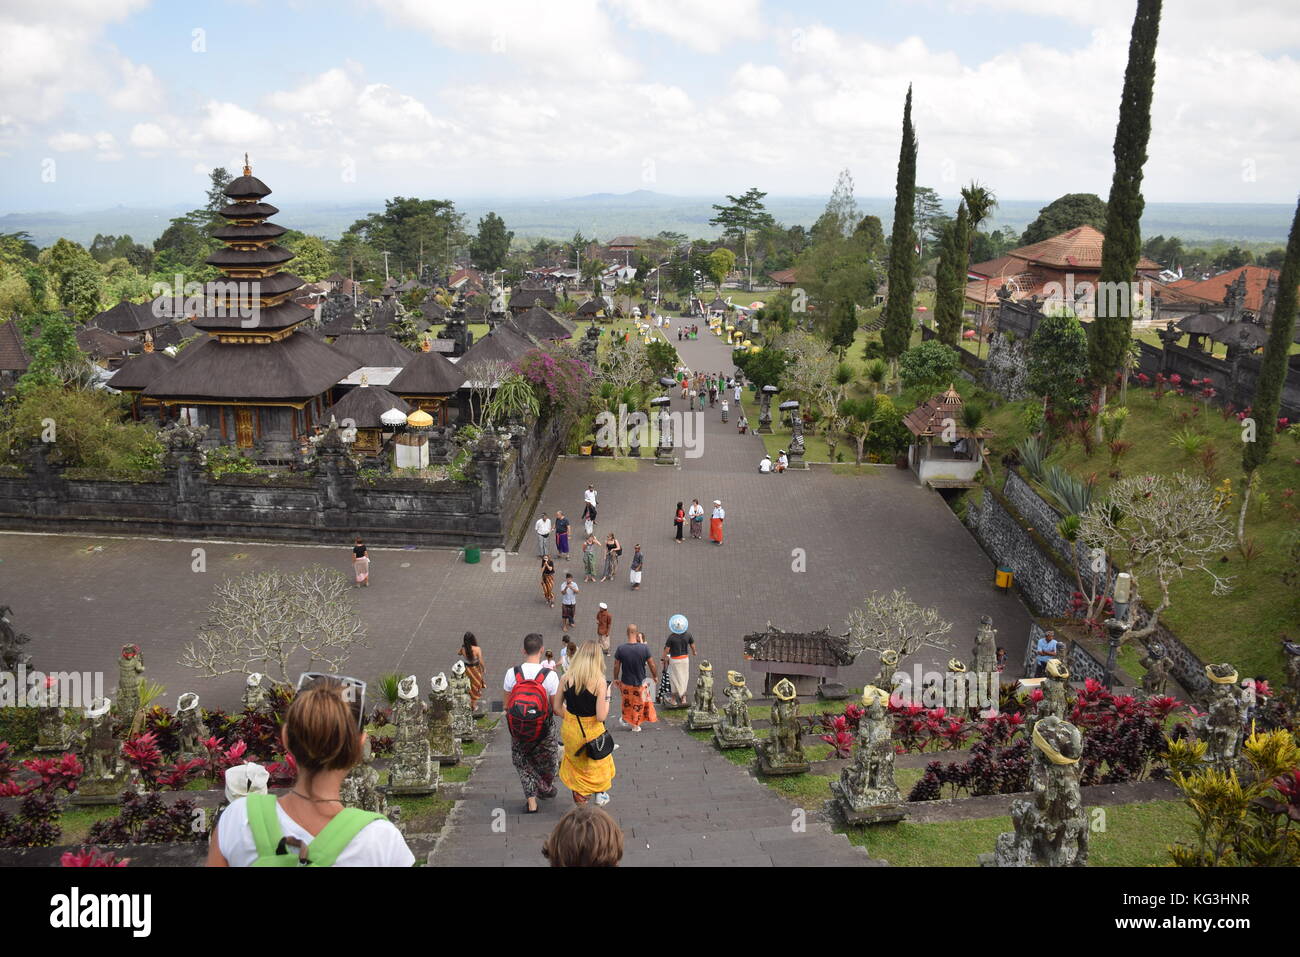 Top view of Pura Besakih hindu temple from the main staircase in Bali, Indonesia Stock Photo